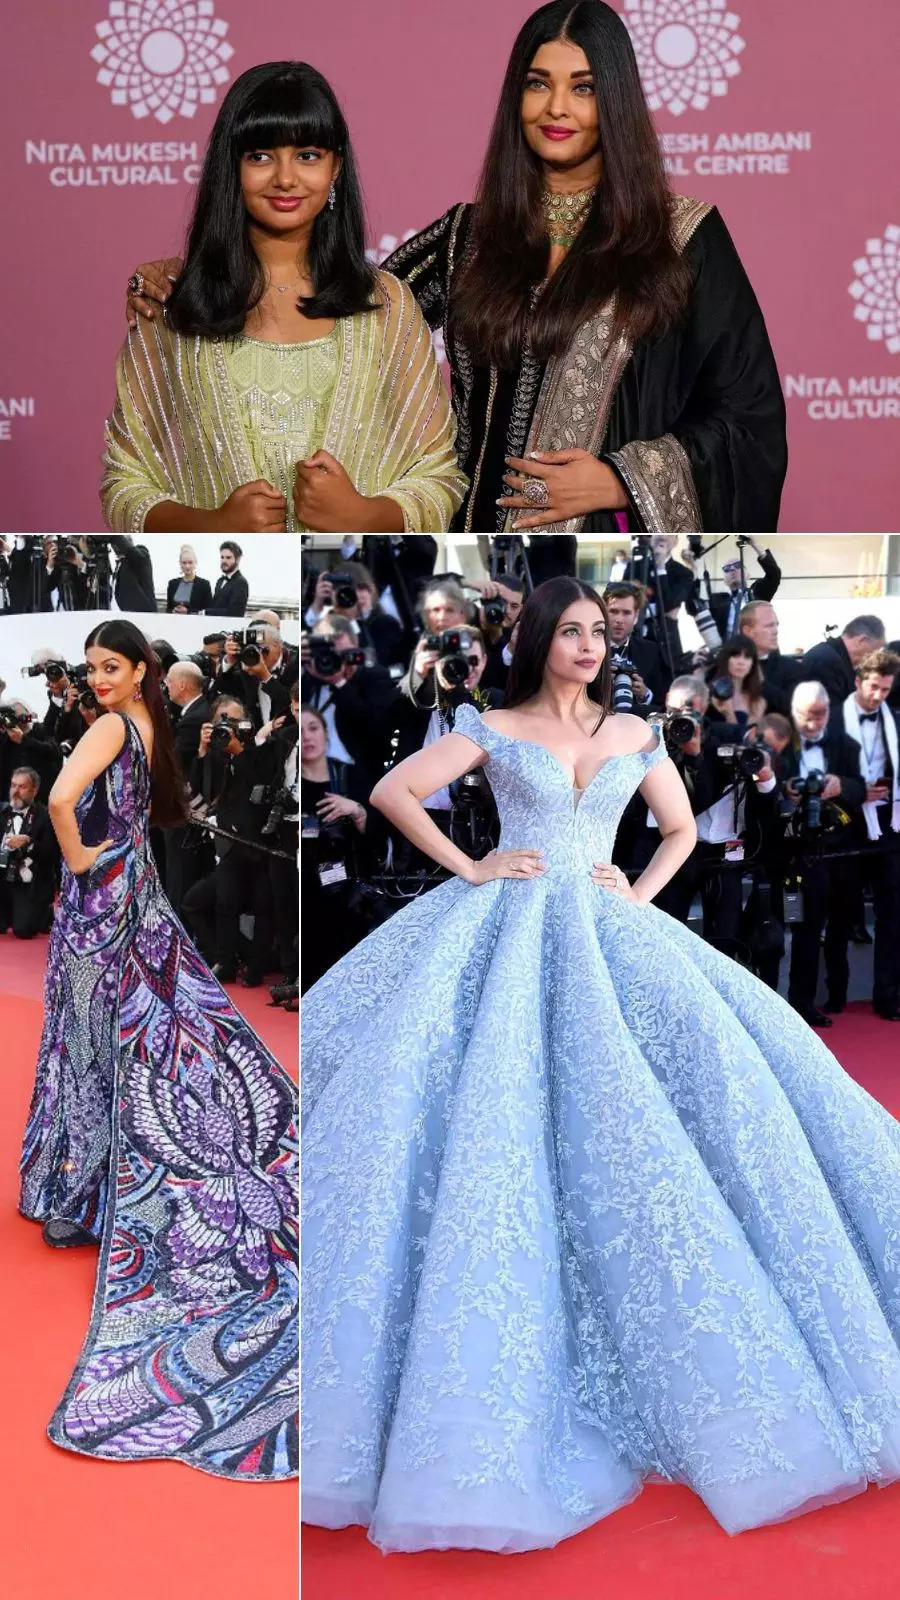 Cannes 2017: Aishwarya Rai channels her inner Cinderella in glorious blue  gown | Ballroom gowns, Debut gowns, Gowns